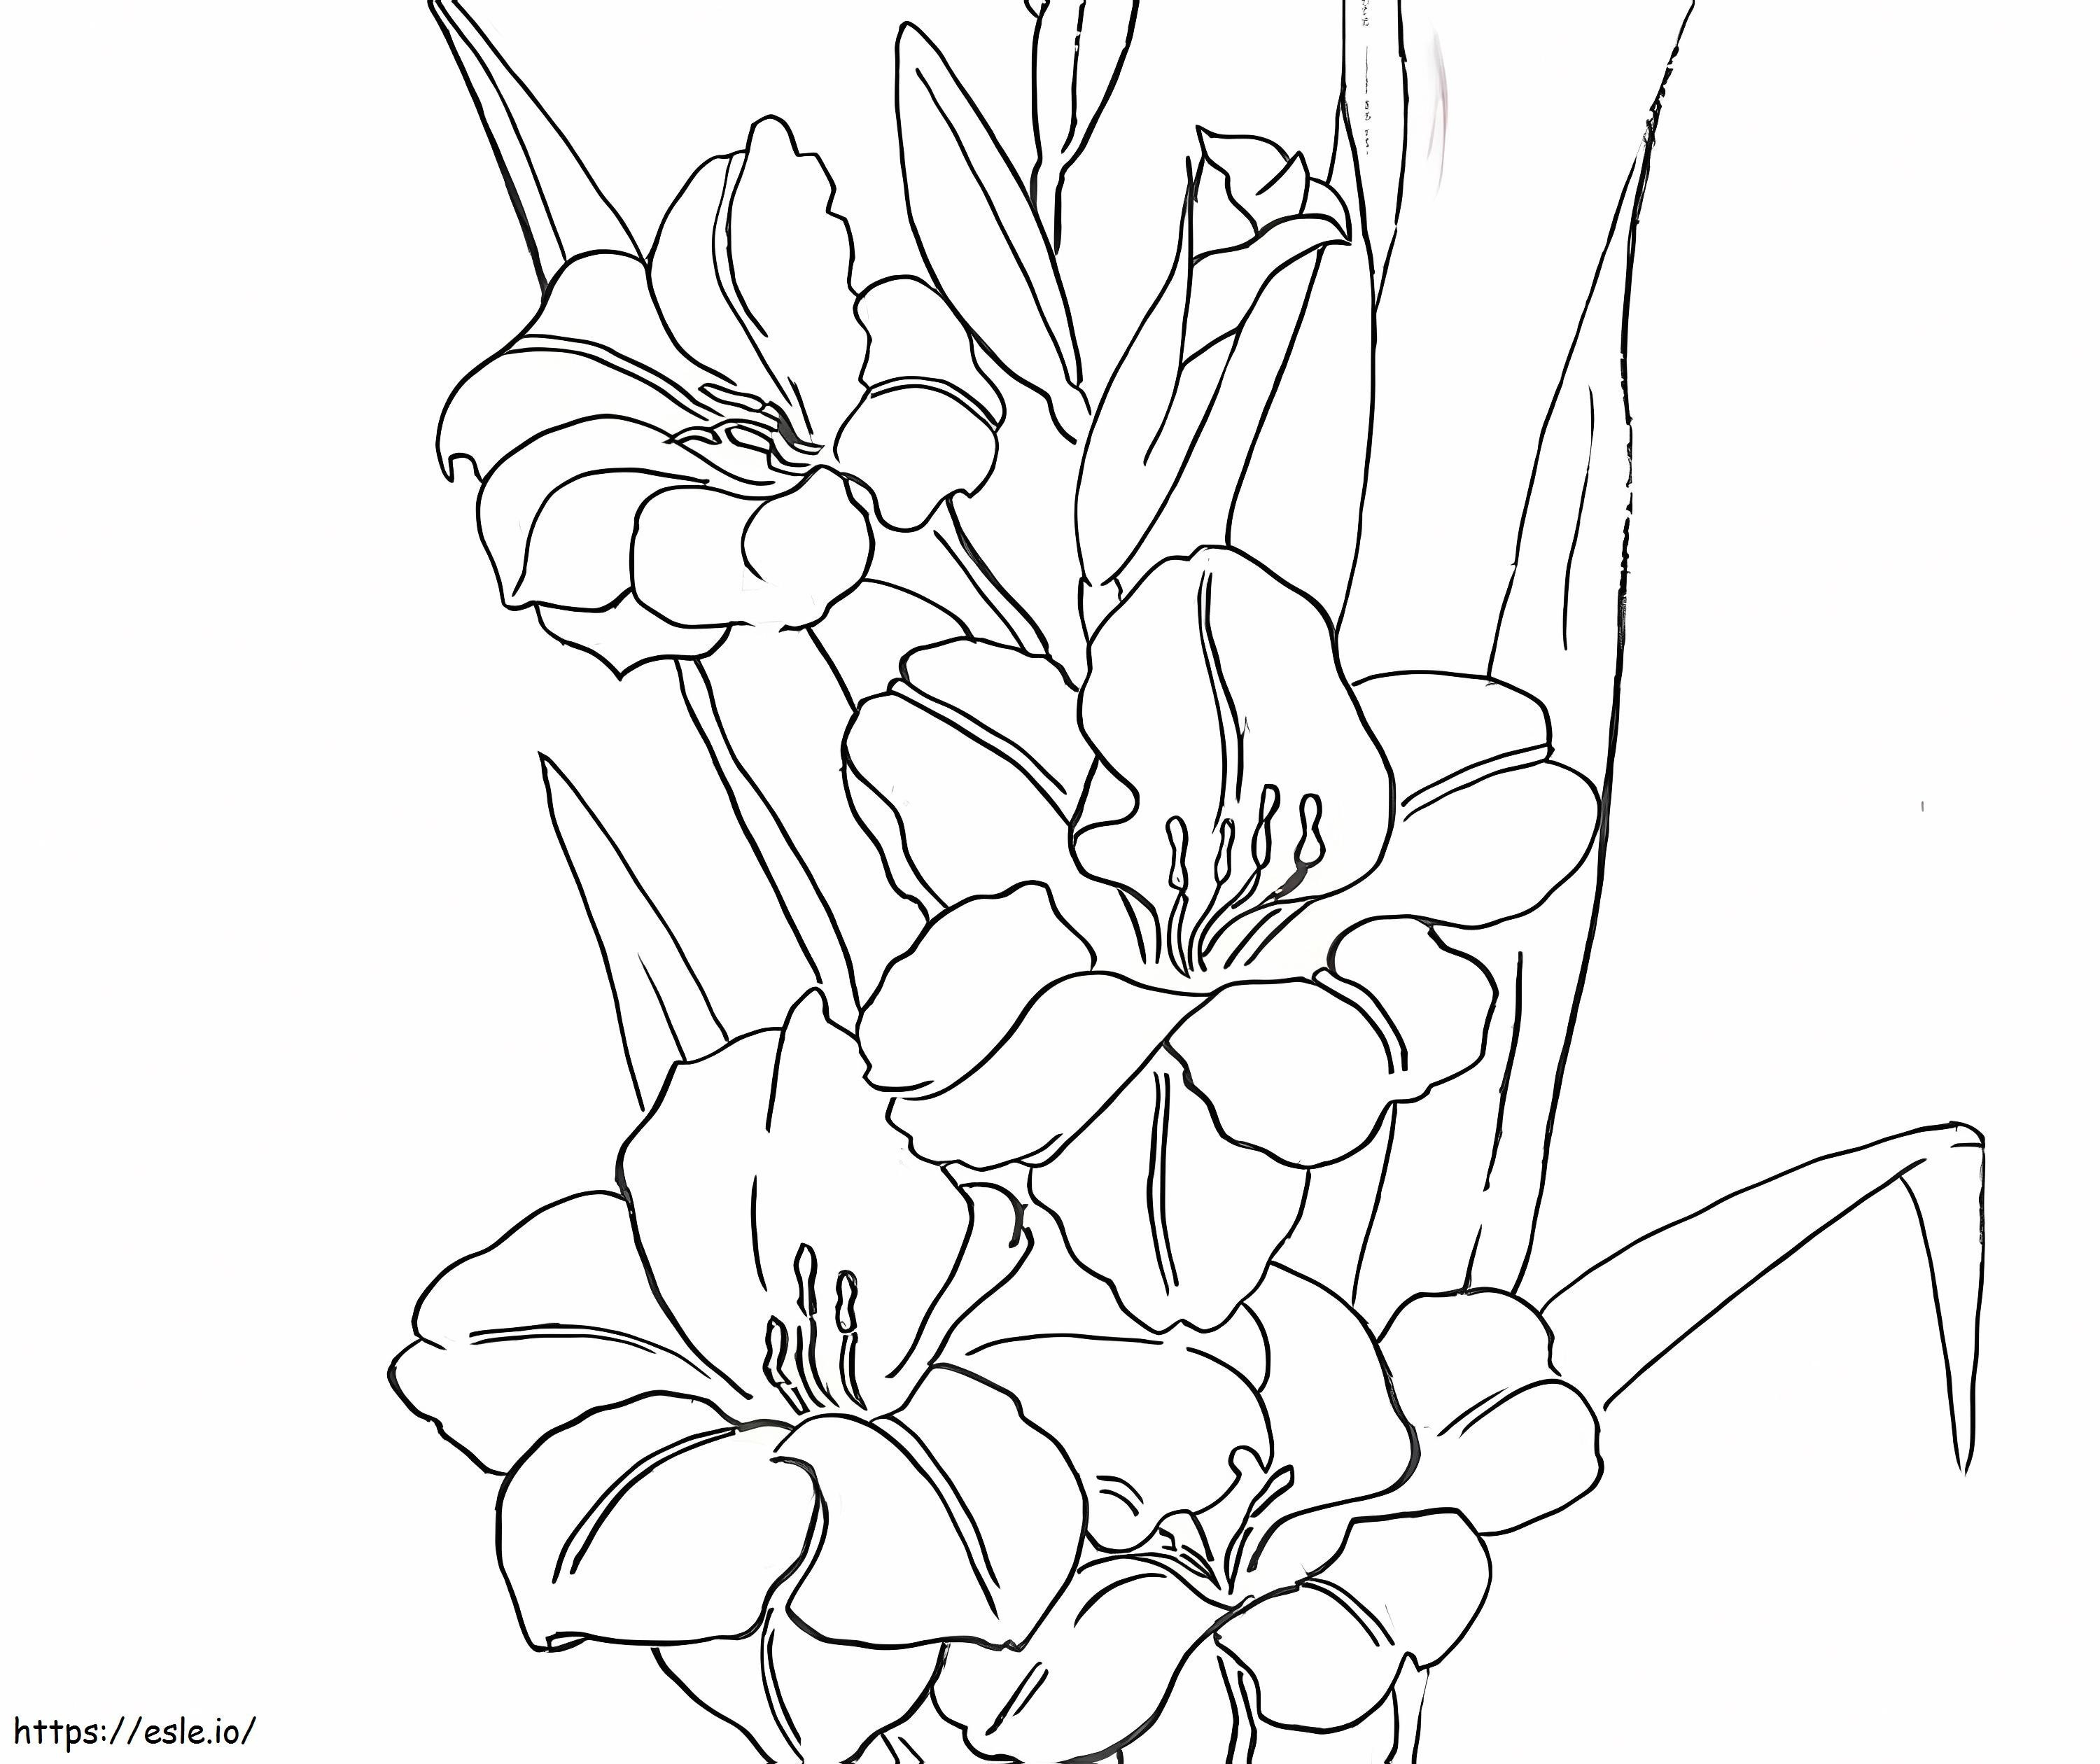 Gladiolus Flowers 4 coloring page